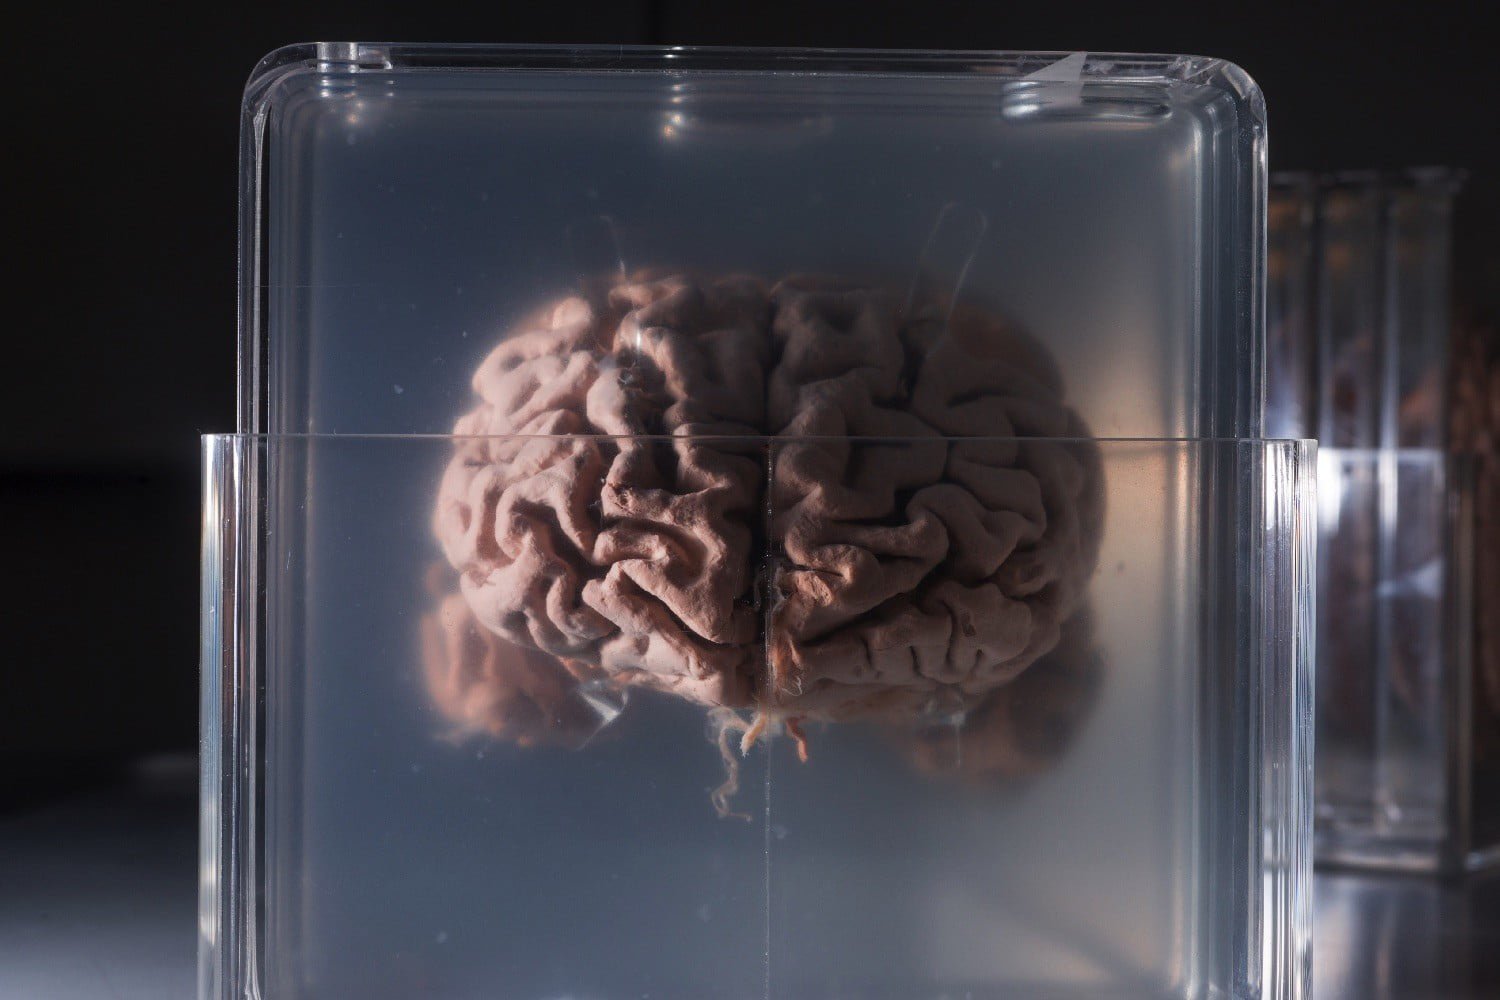 The company offers to freeze your brain for digitization in the future